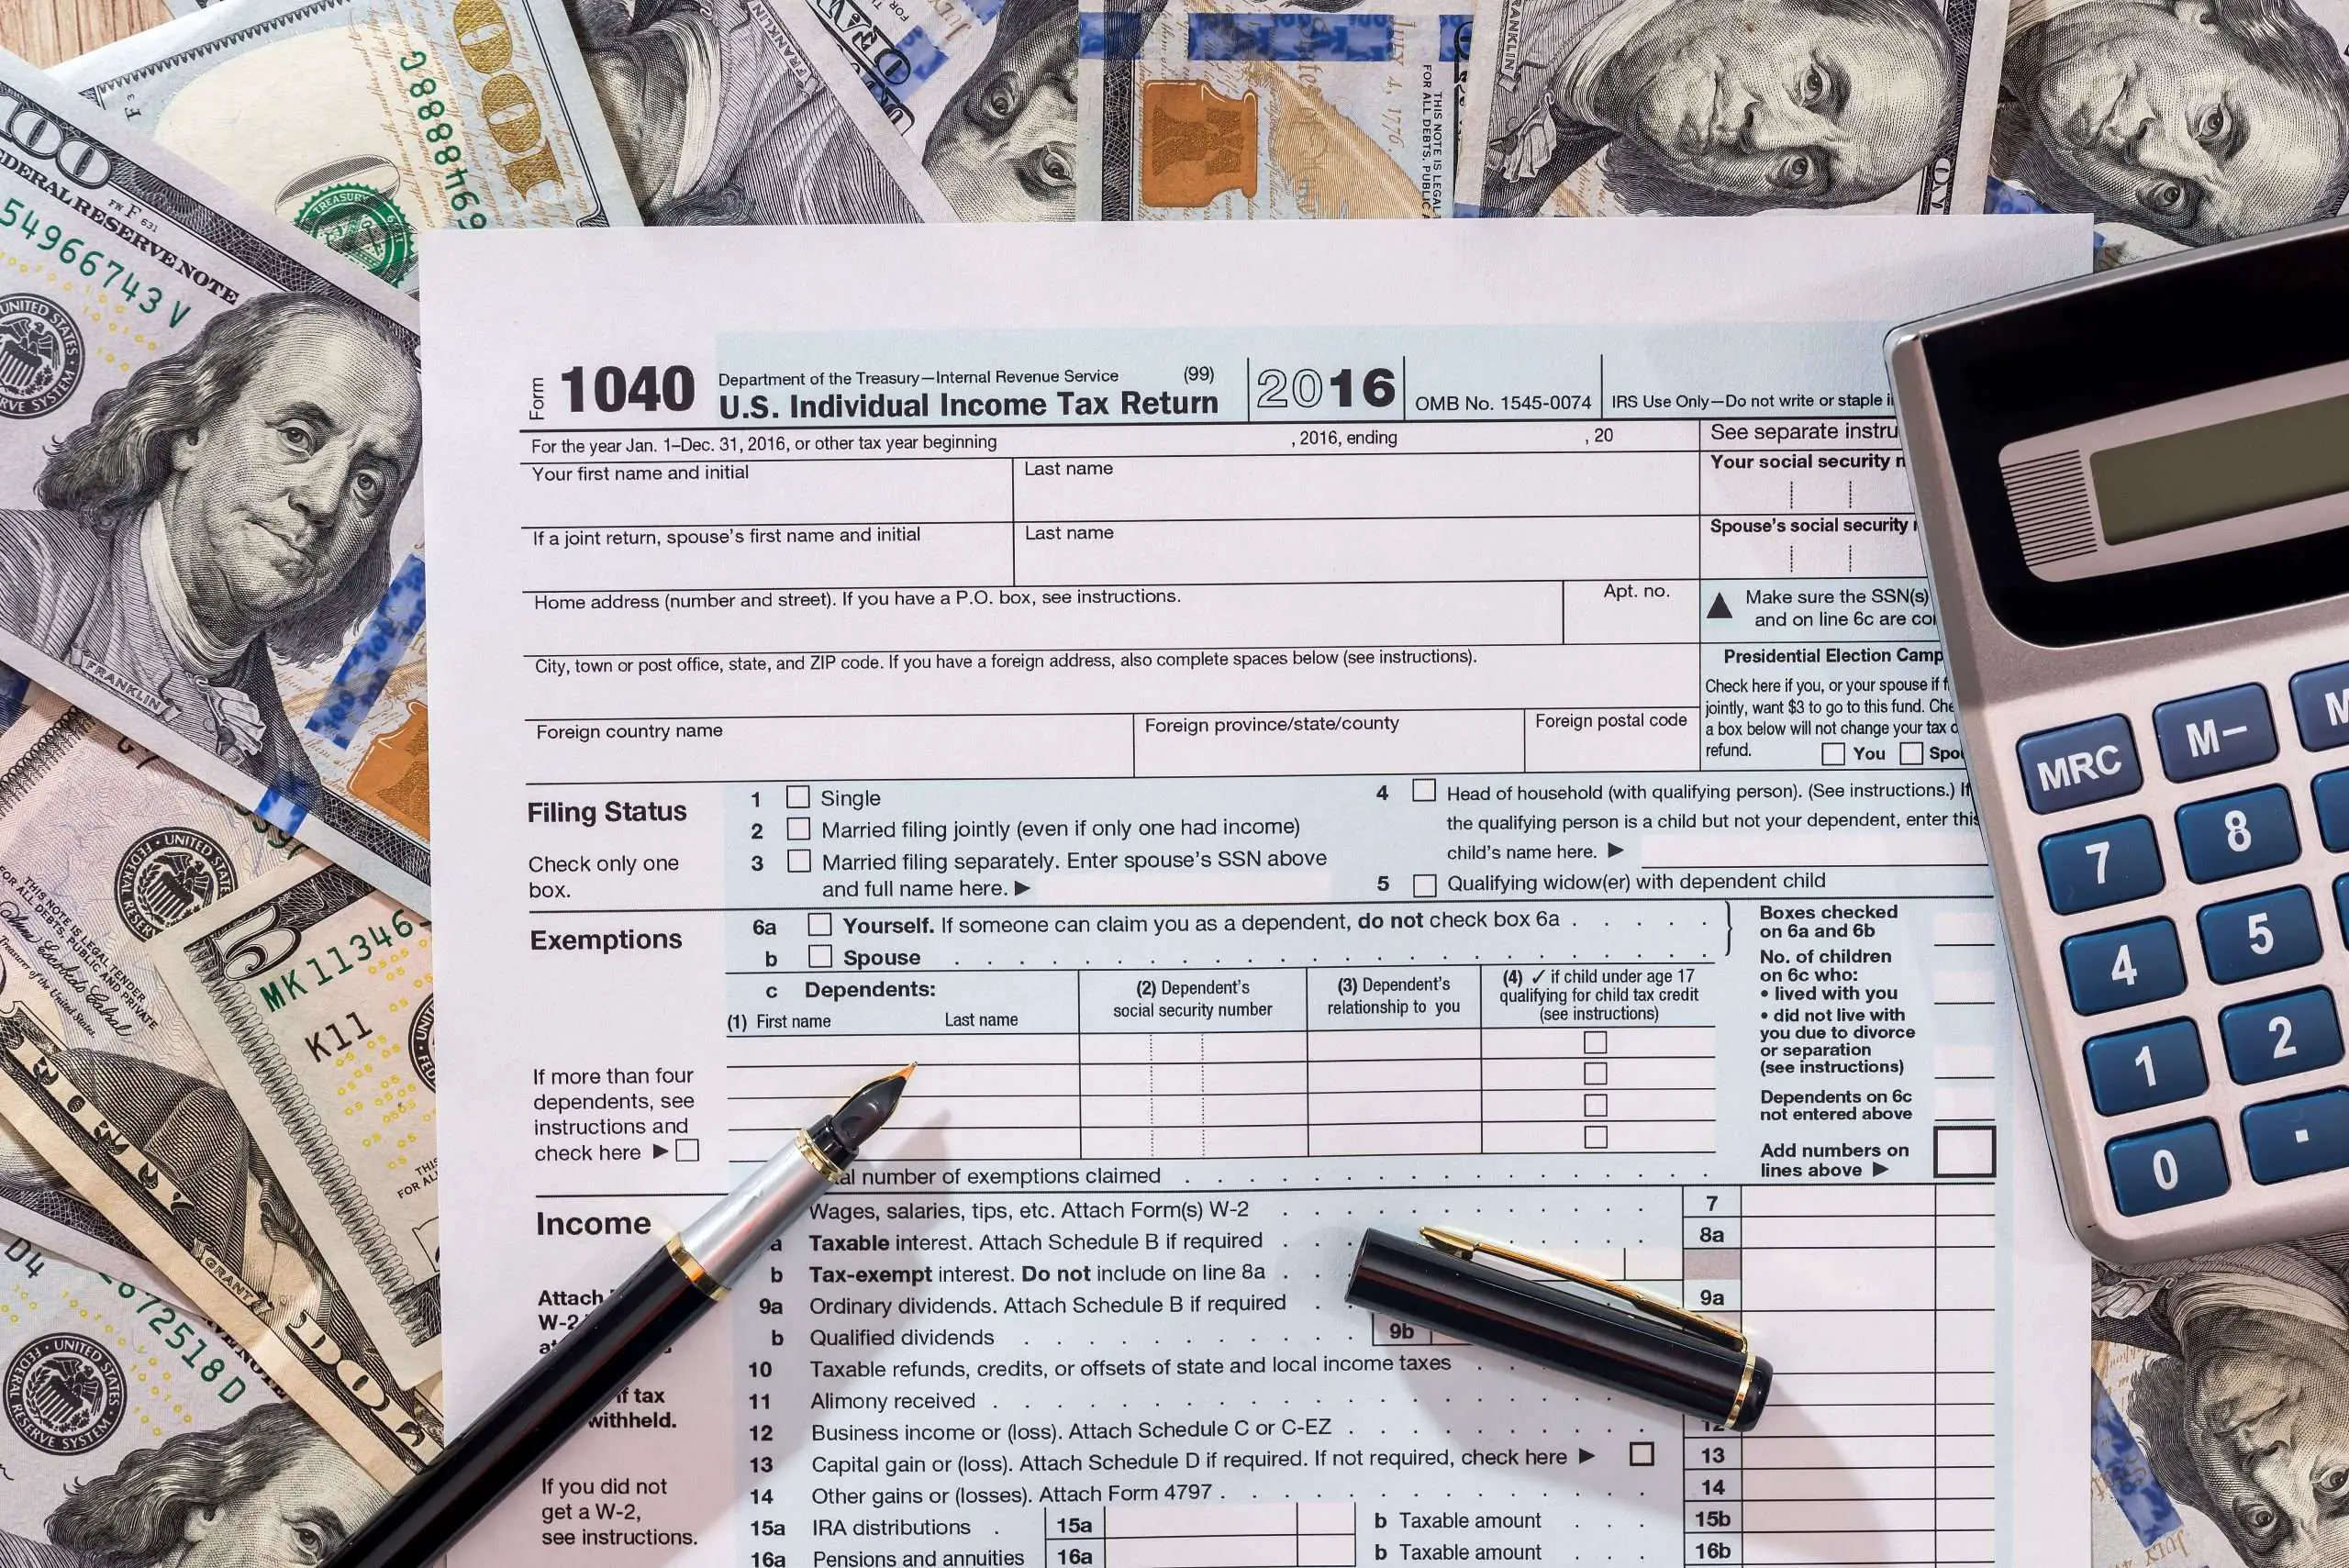 2018 Withholding: New IRS Calculator Shows What You Owe